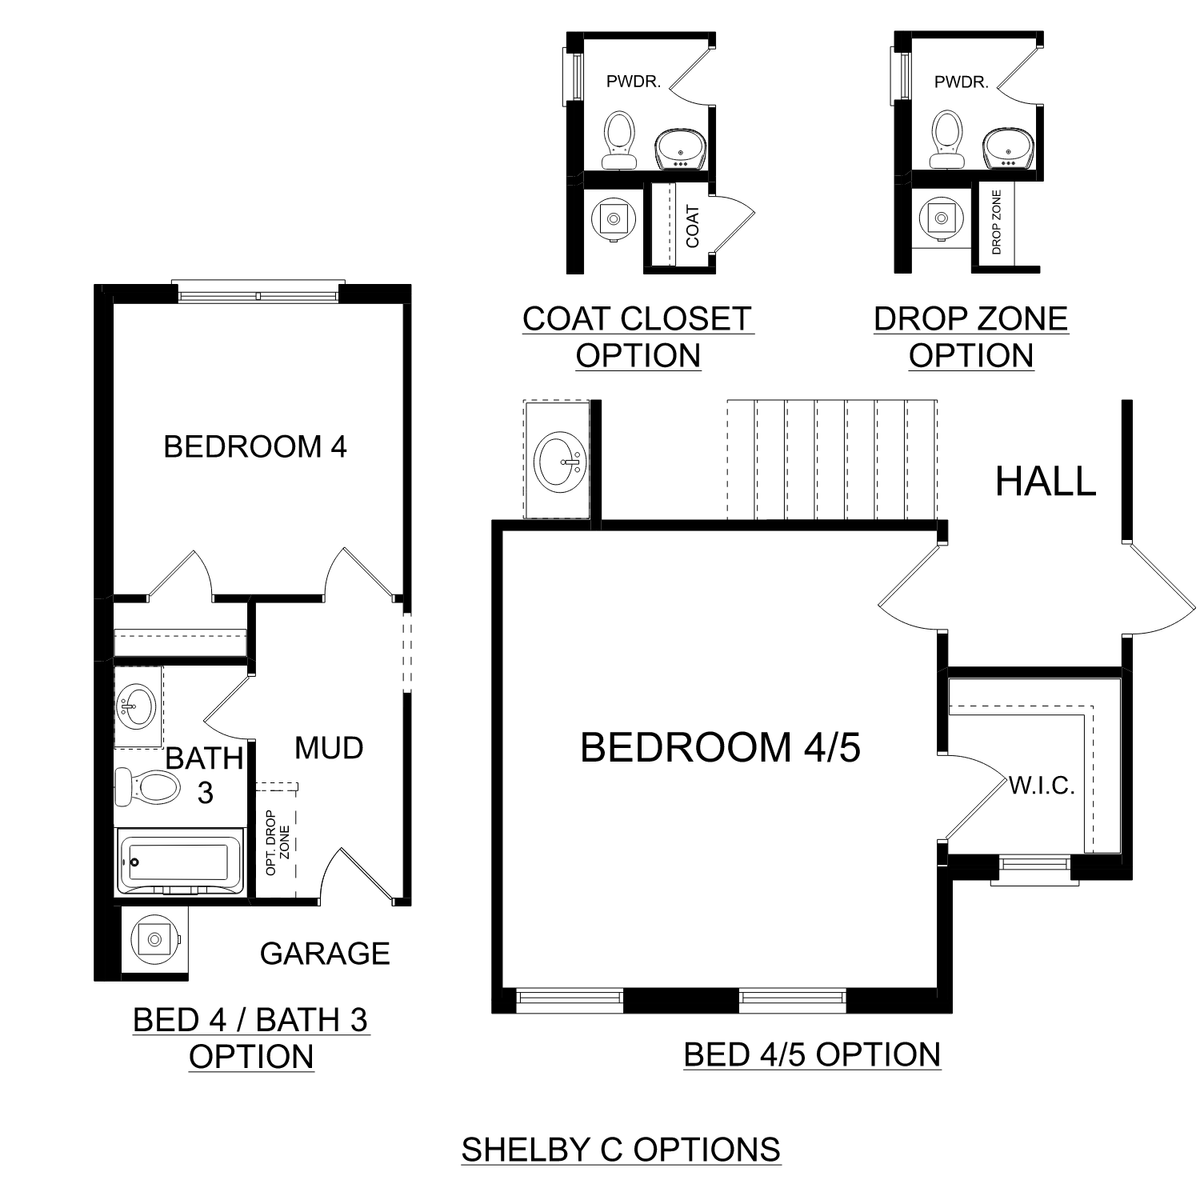 3 - The Shelby C buildable floor plan layout in Davidson Homes' Pavilion community.